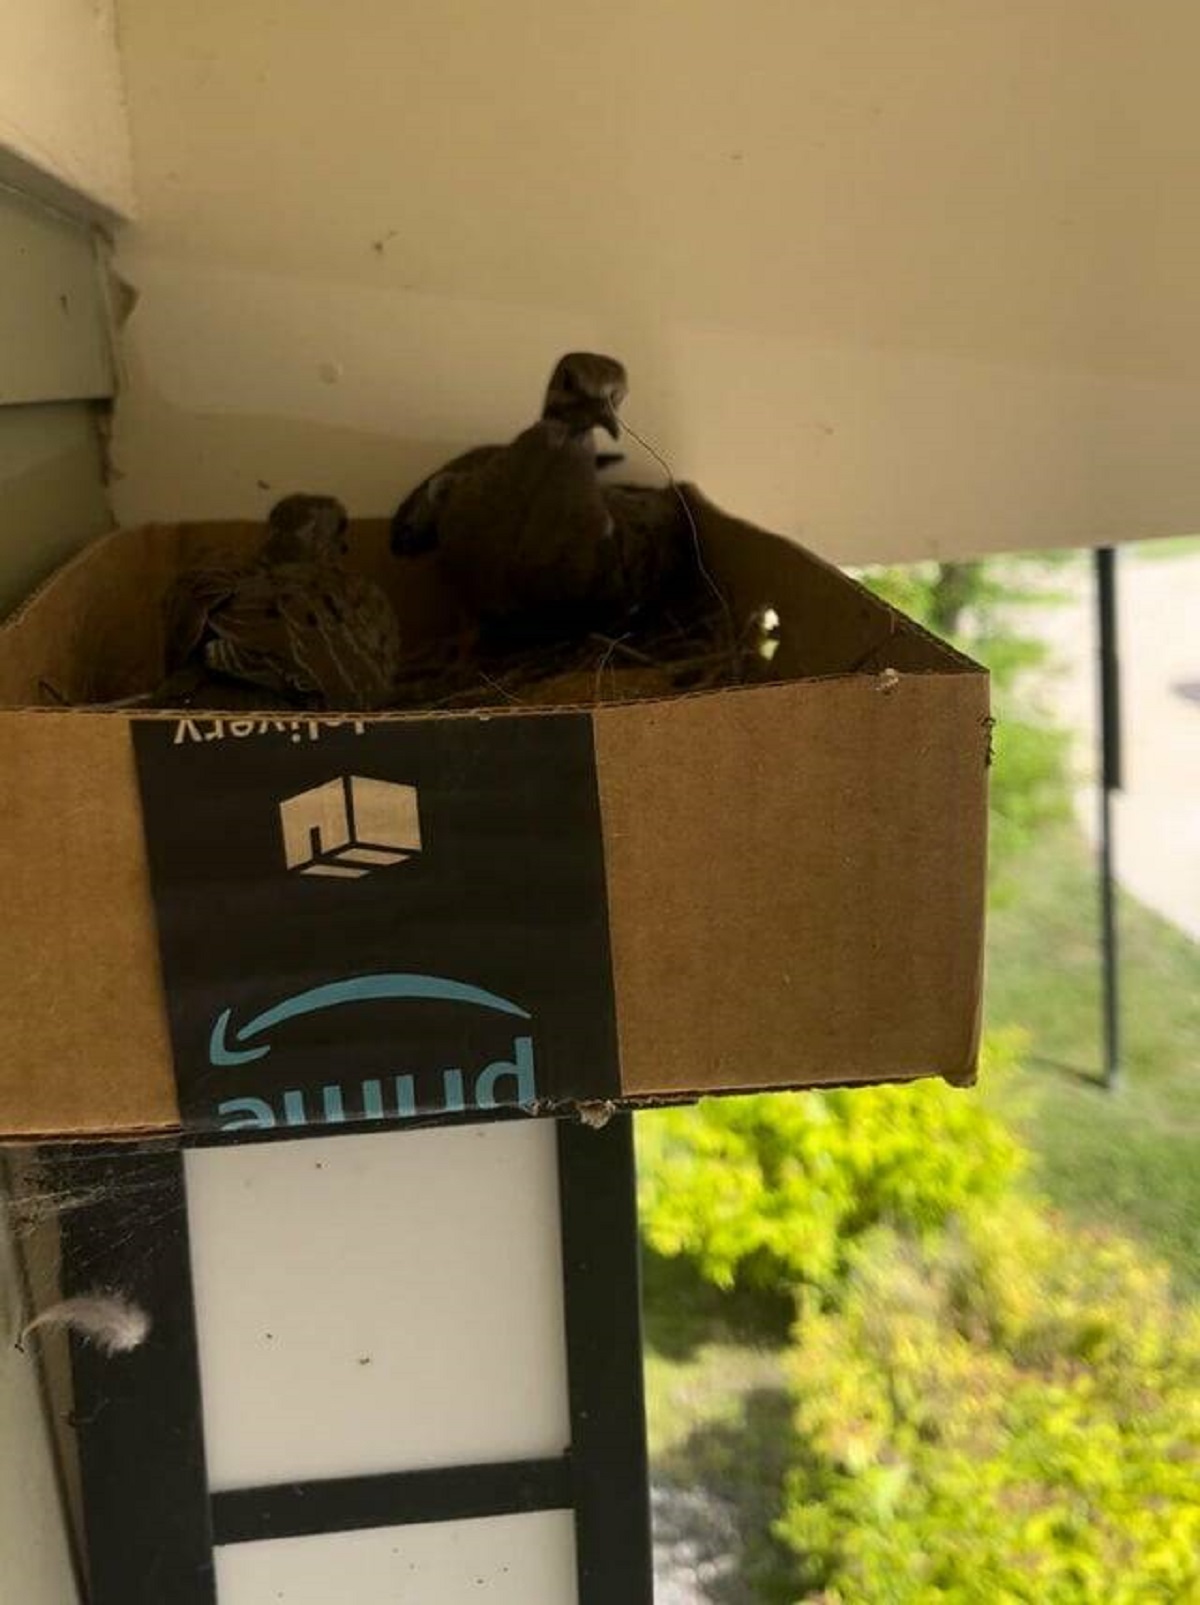 "A bird with her babies have been living on my porch light for weeks now, helped them out with a nest."